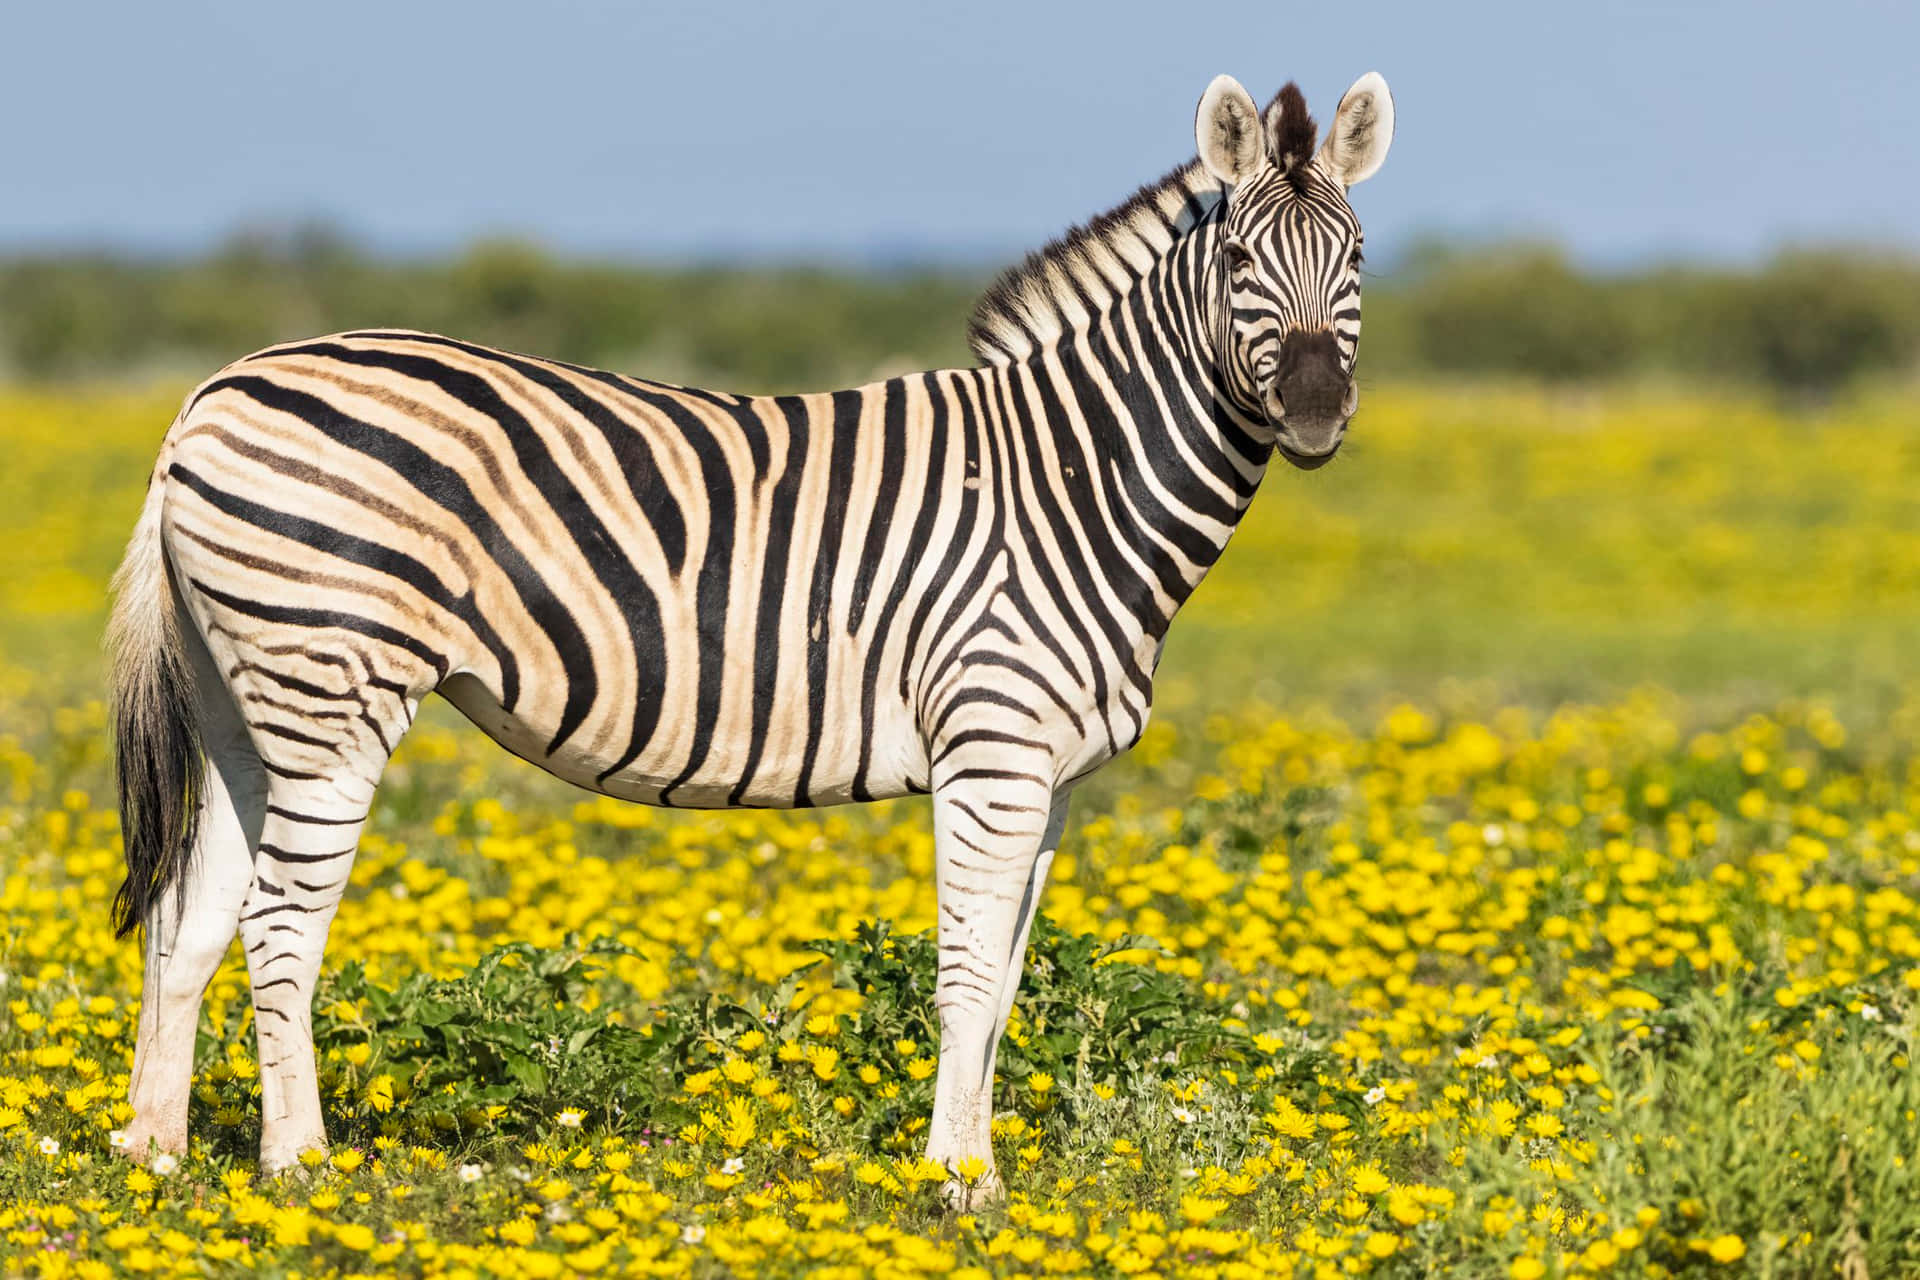 A zebra in the wild grazing across the African plains.